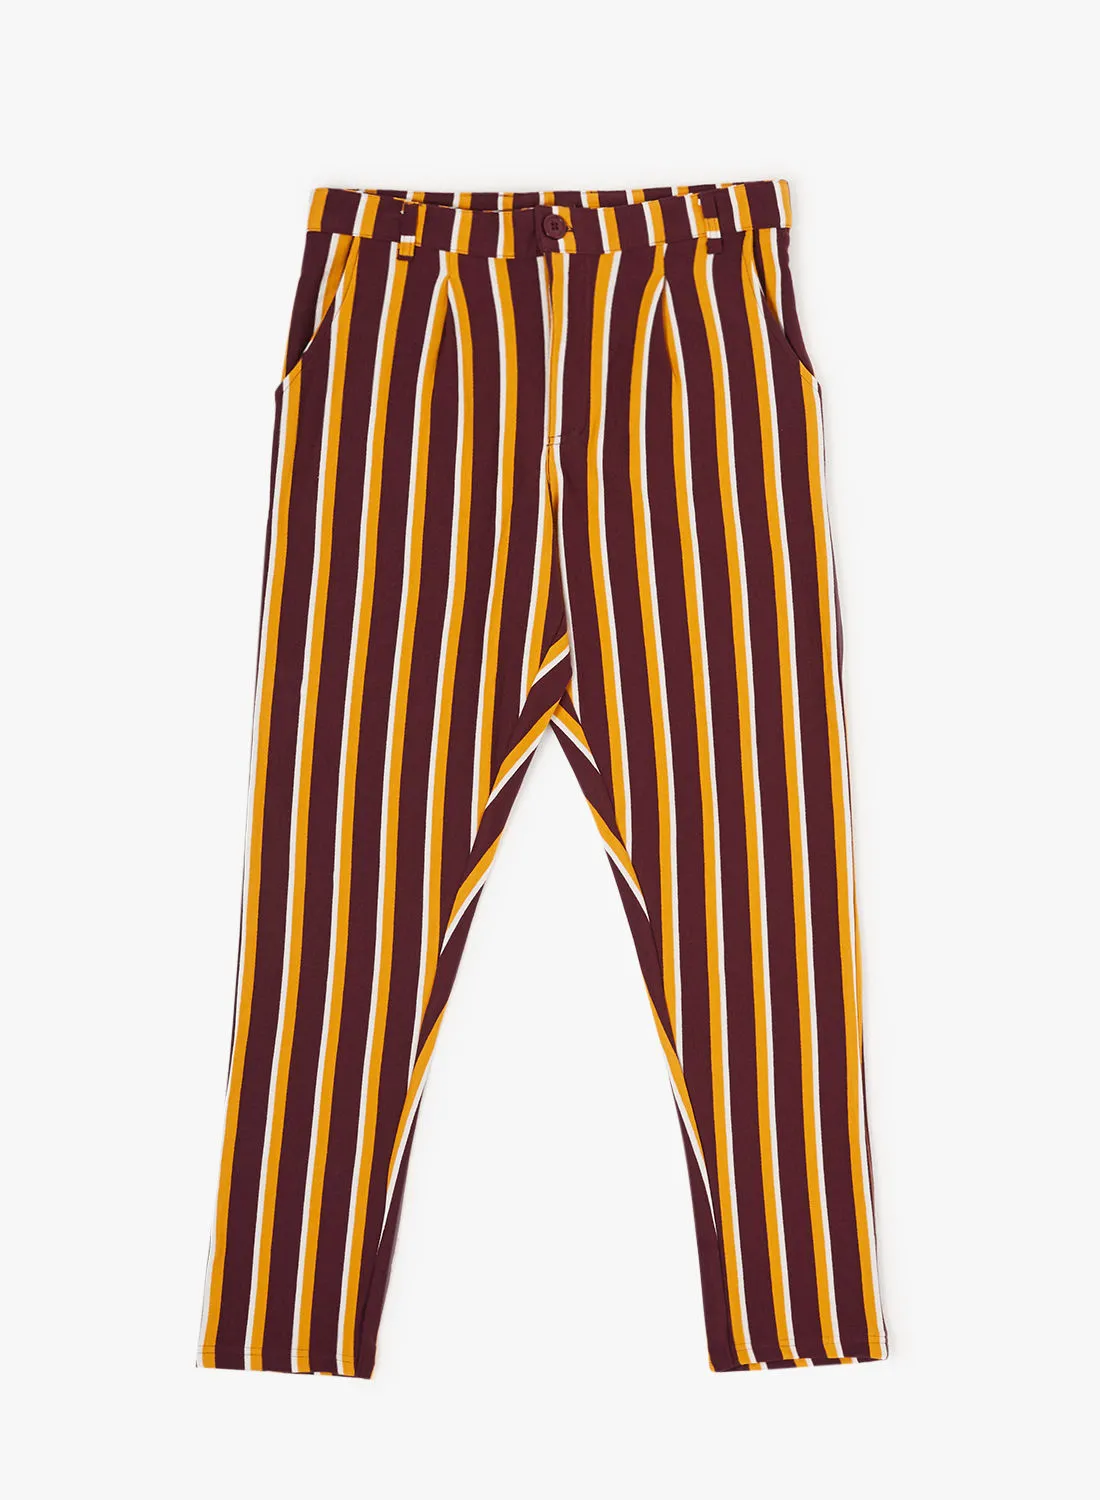 STATE 8 Striped French Terry Trousers Wine